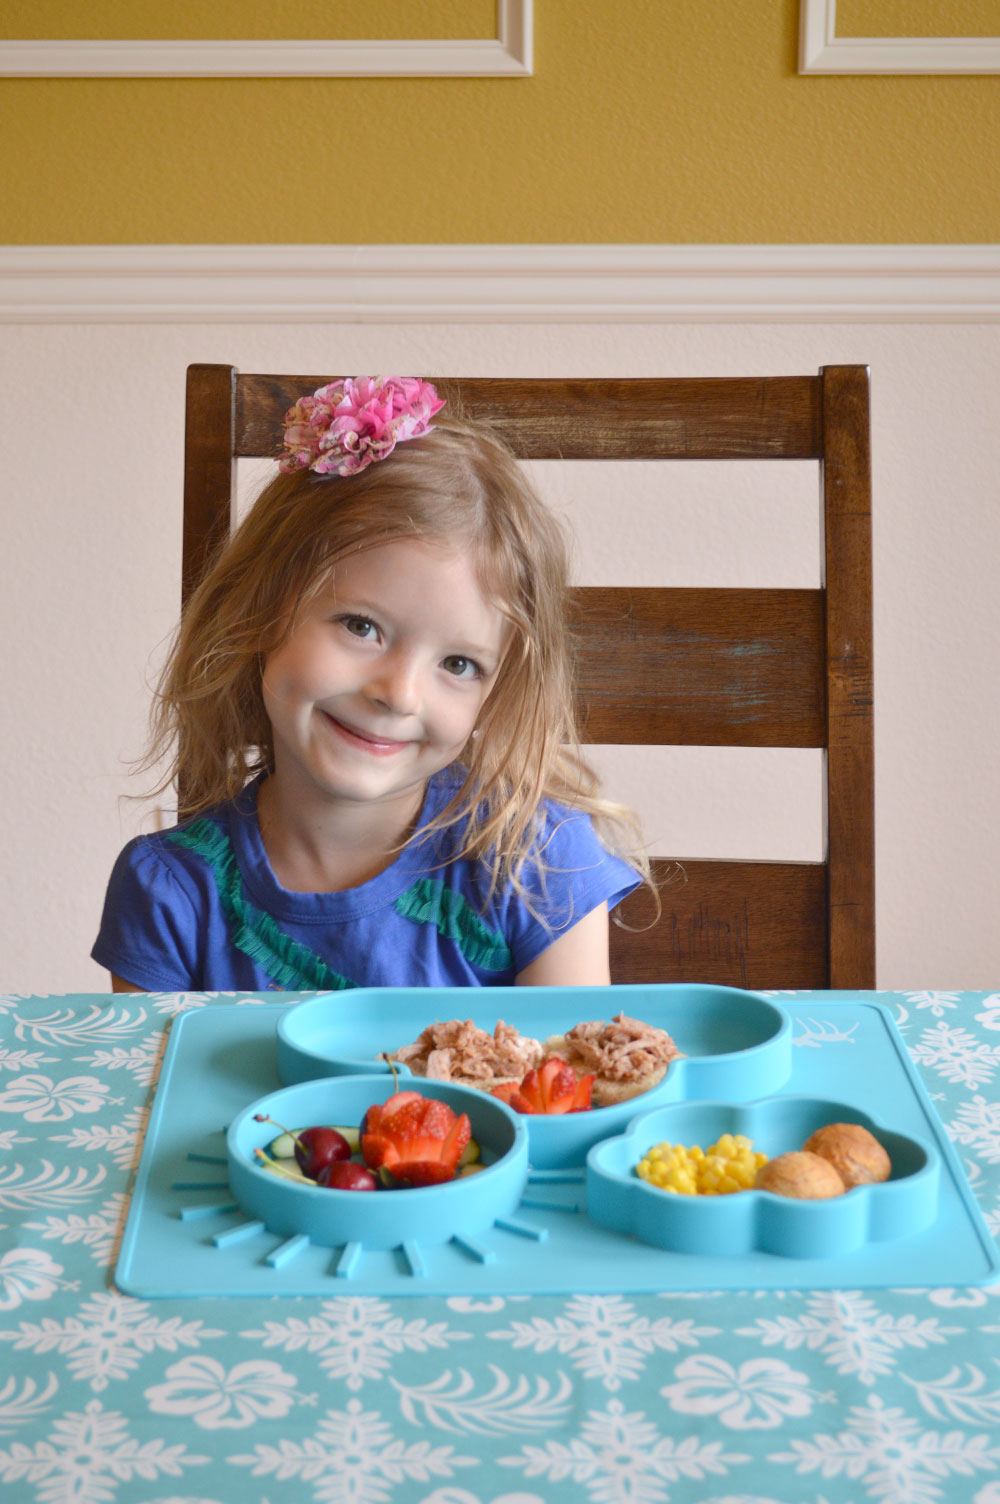 Make lunch fun for kids who are picky eaters